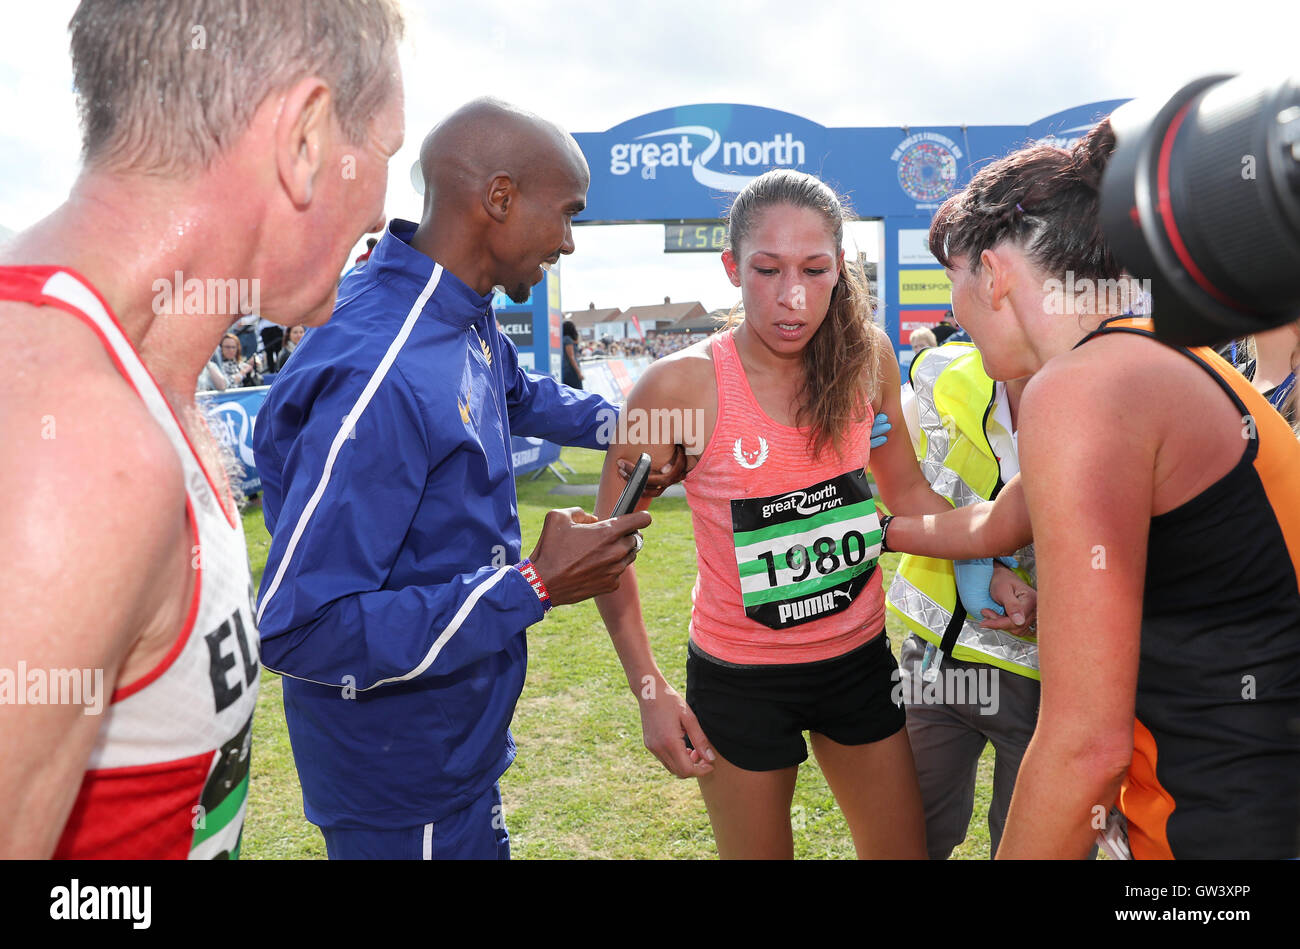 Tania And Mo Farah After Completing The Great North Run In Newcastle Stock Photo Alamy